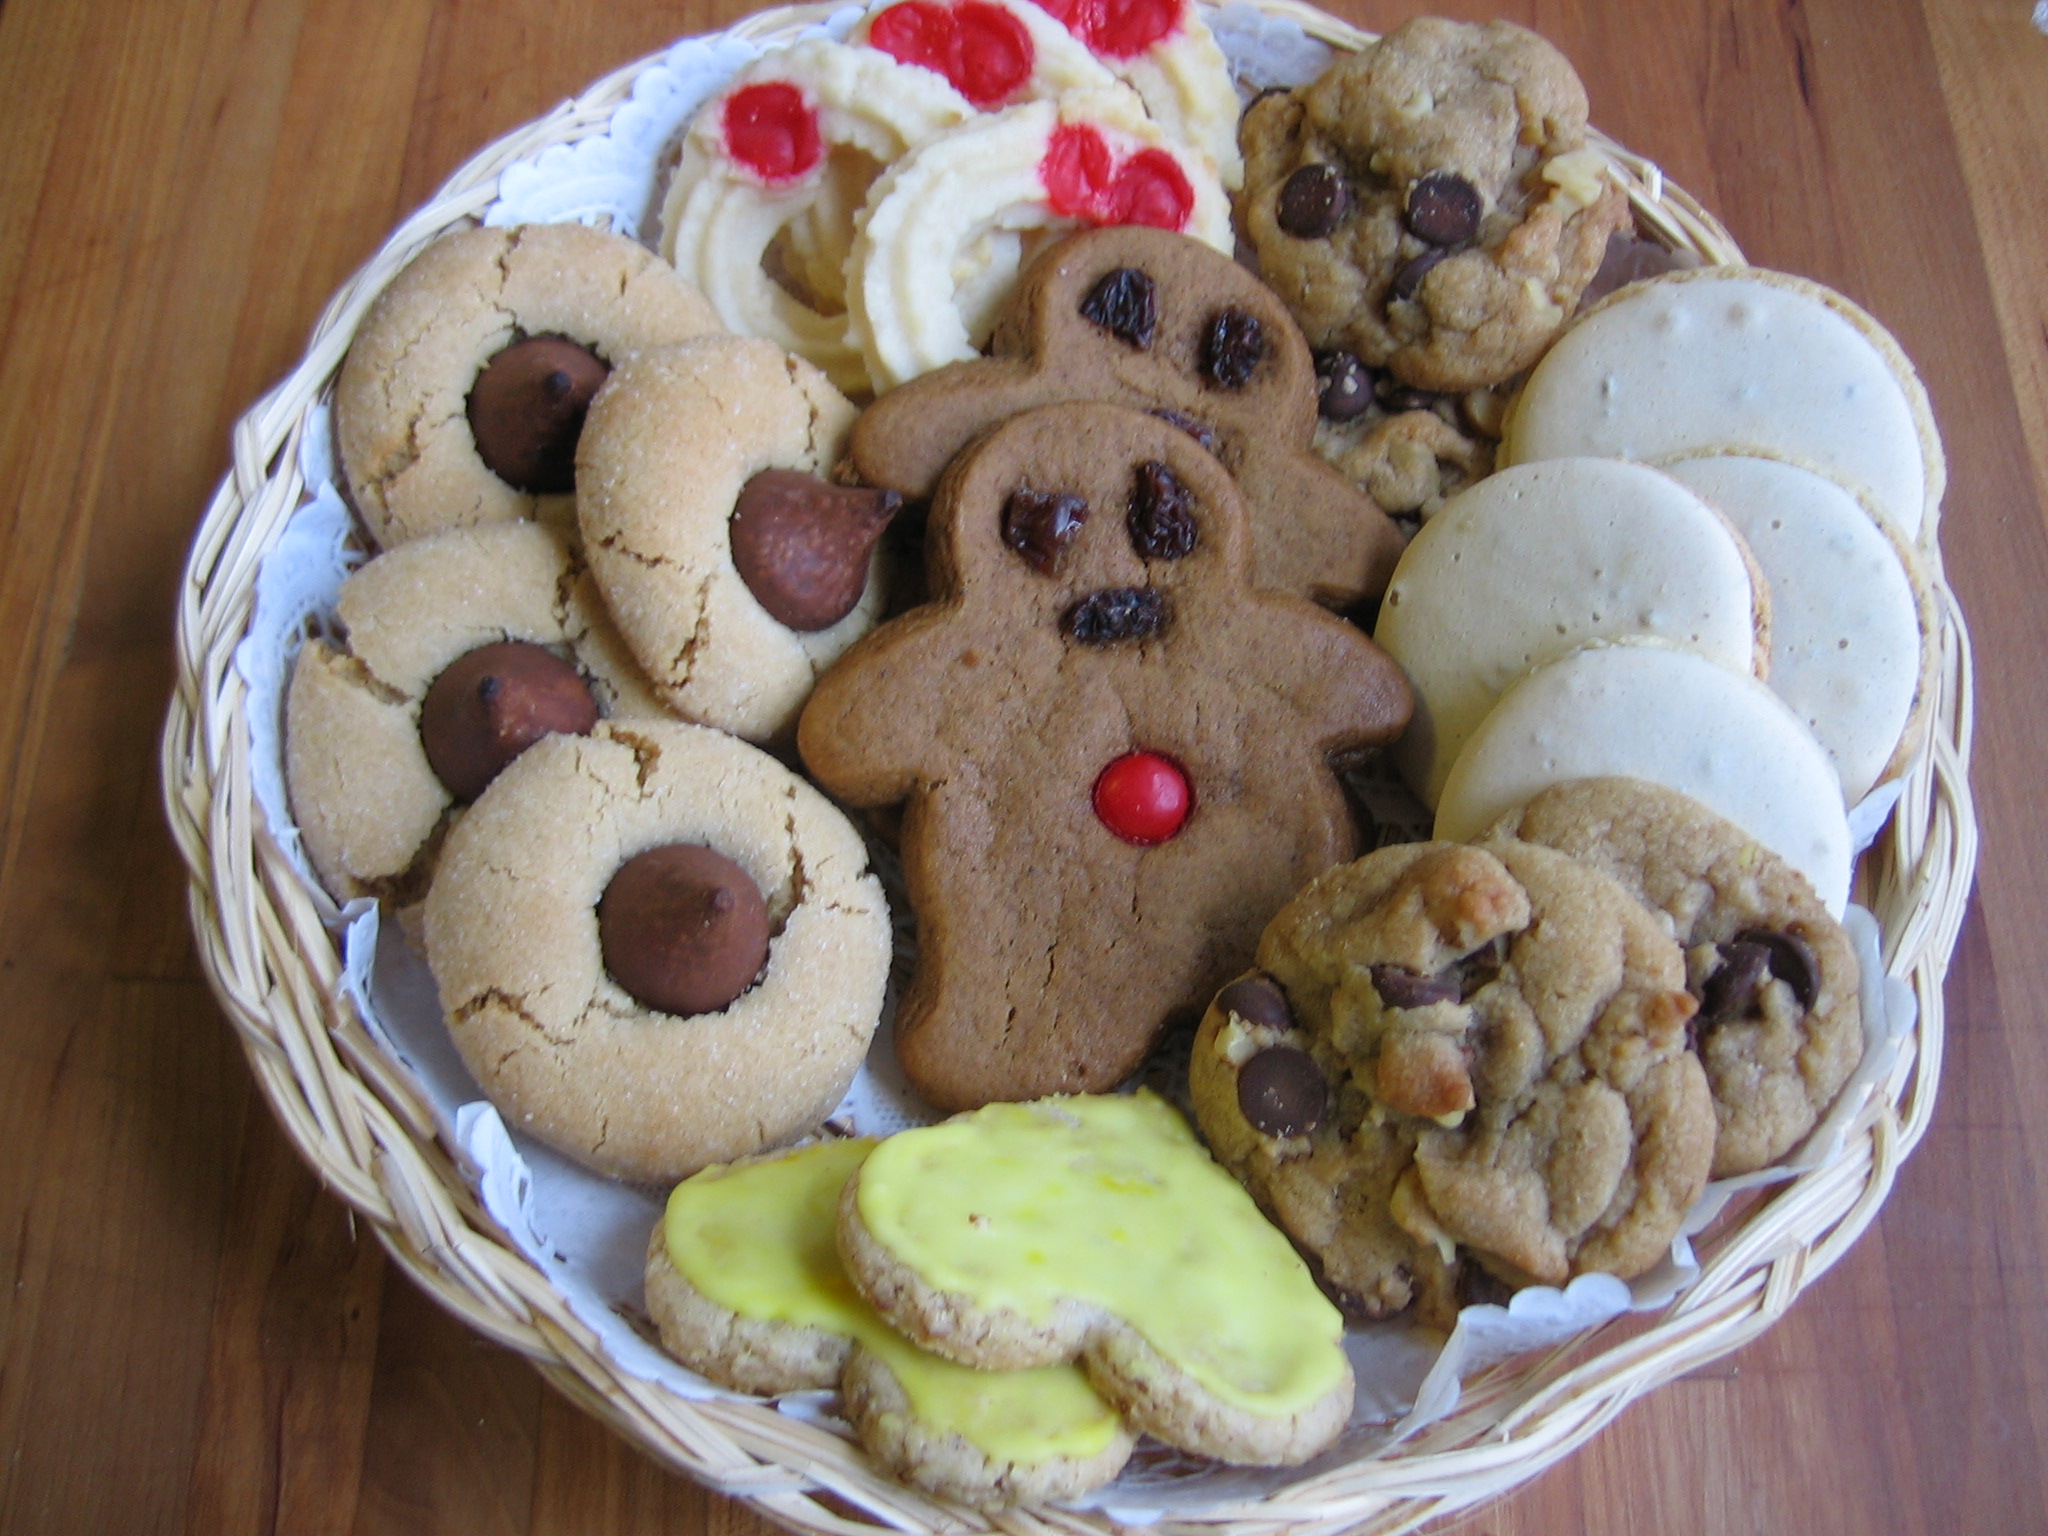 A variety of cookies, including gingerbread men and drop and molded cookies